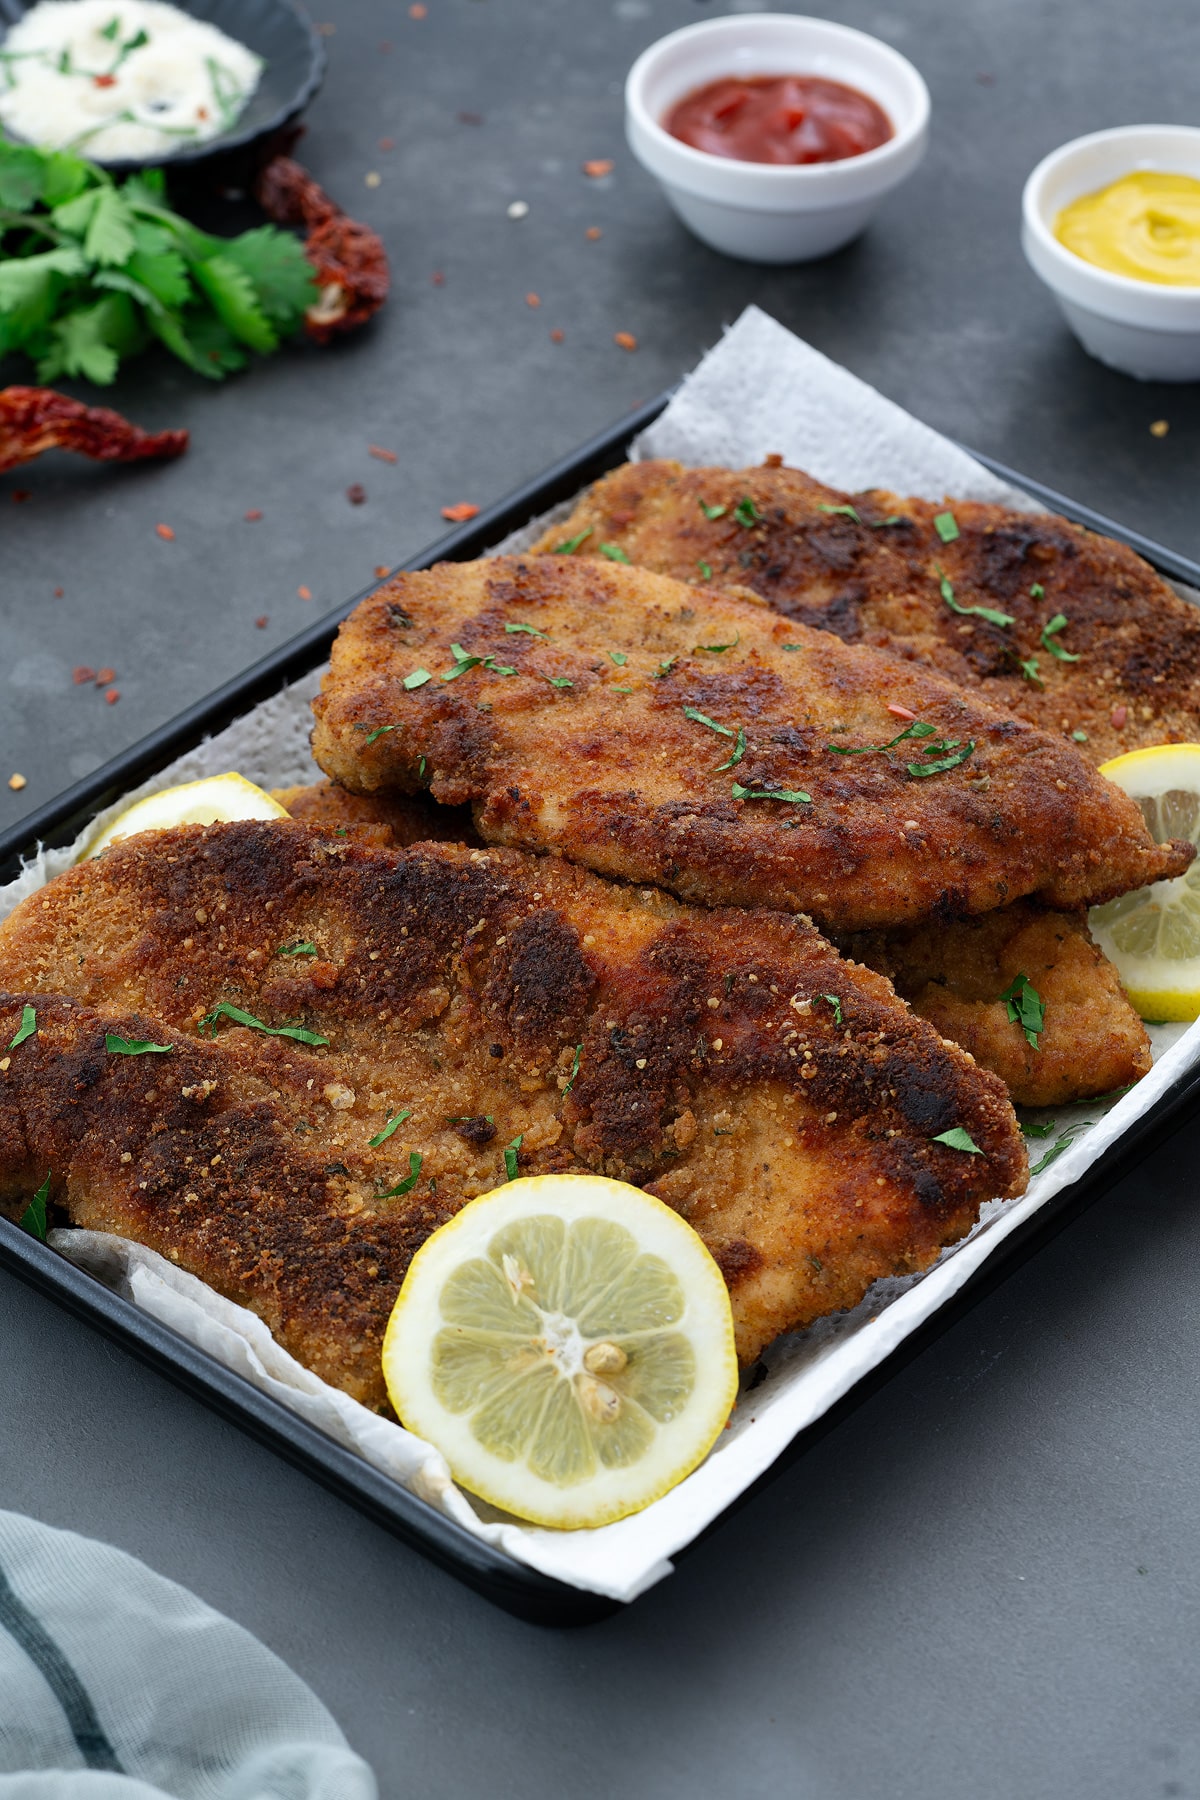 Crispy and Tender Chicken Cutlets on a black tray, presented on a grey table with fresh coriander leaves and zesty lemon slices. Accompanied by white cups of flavorful Ketchup and yellow mustard dips.